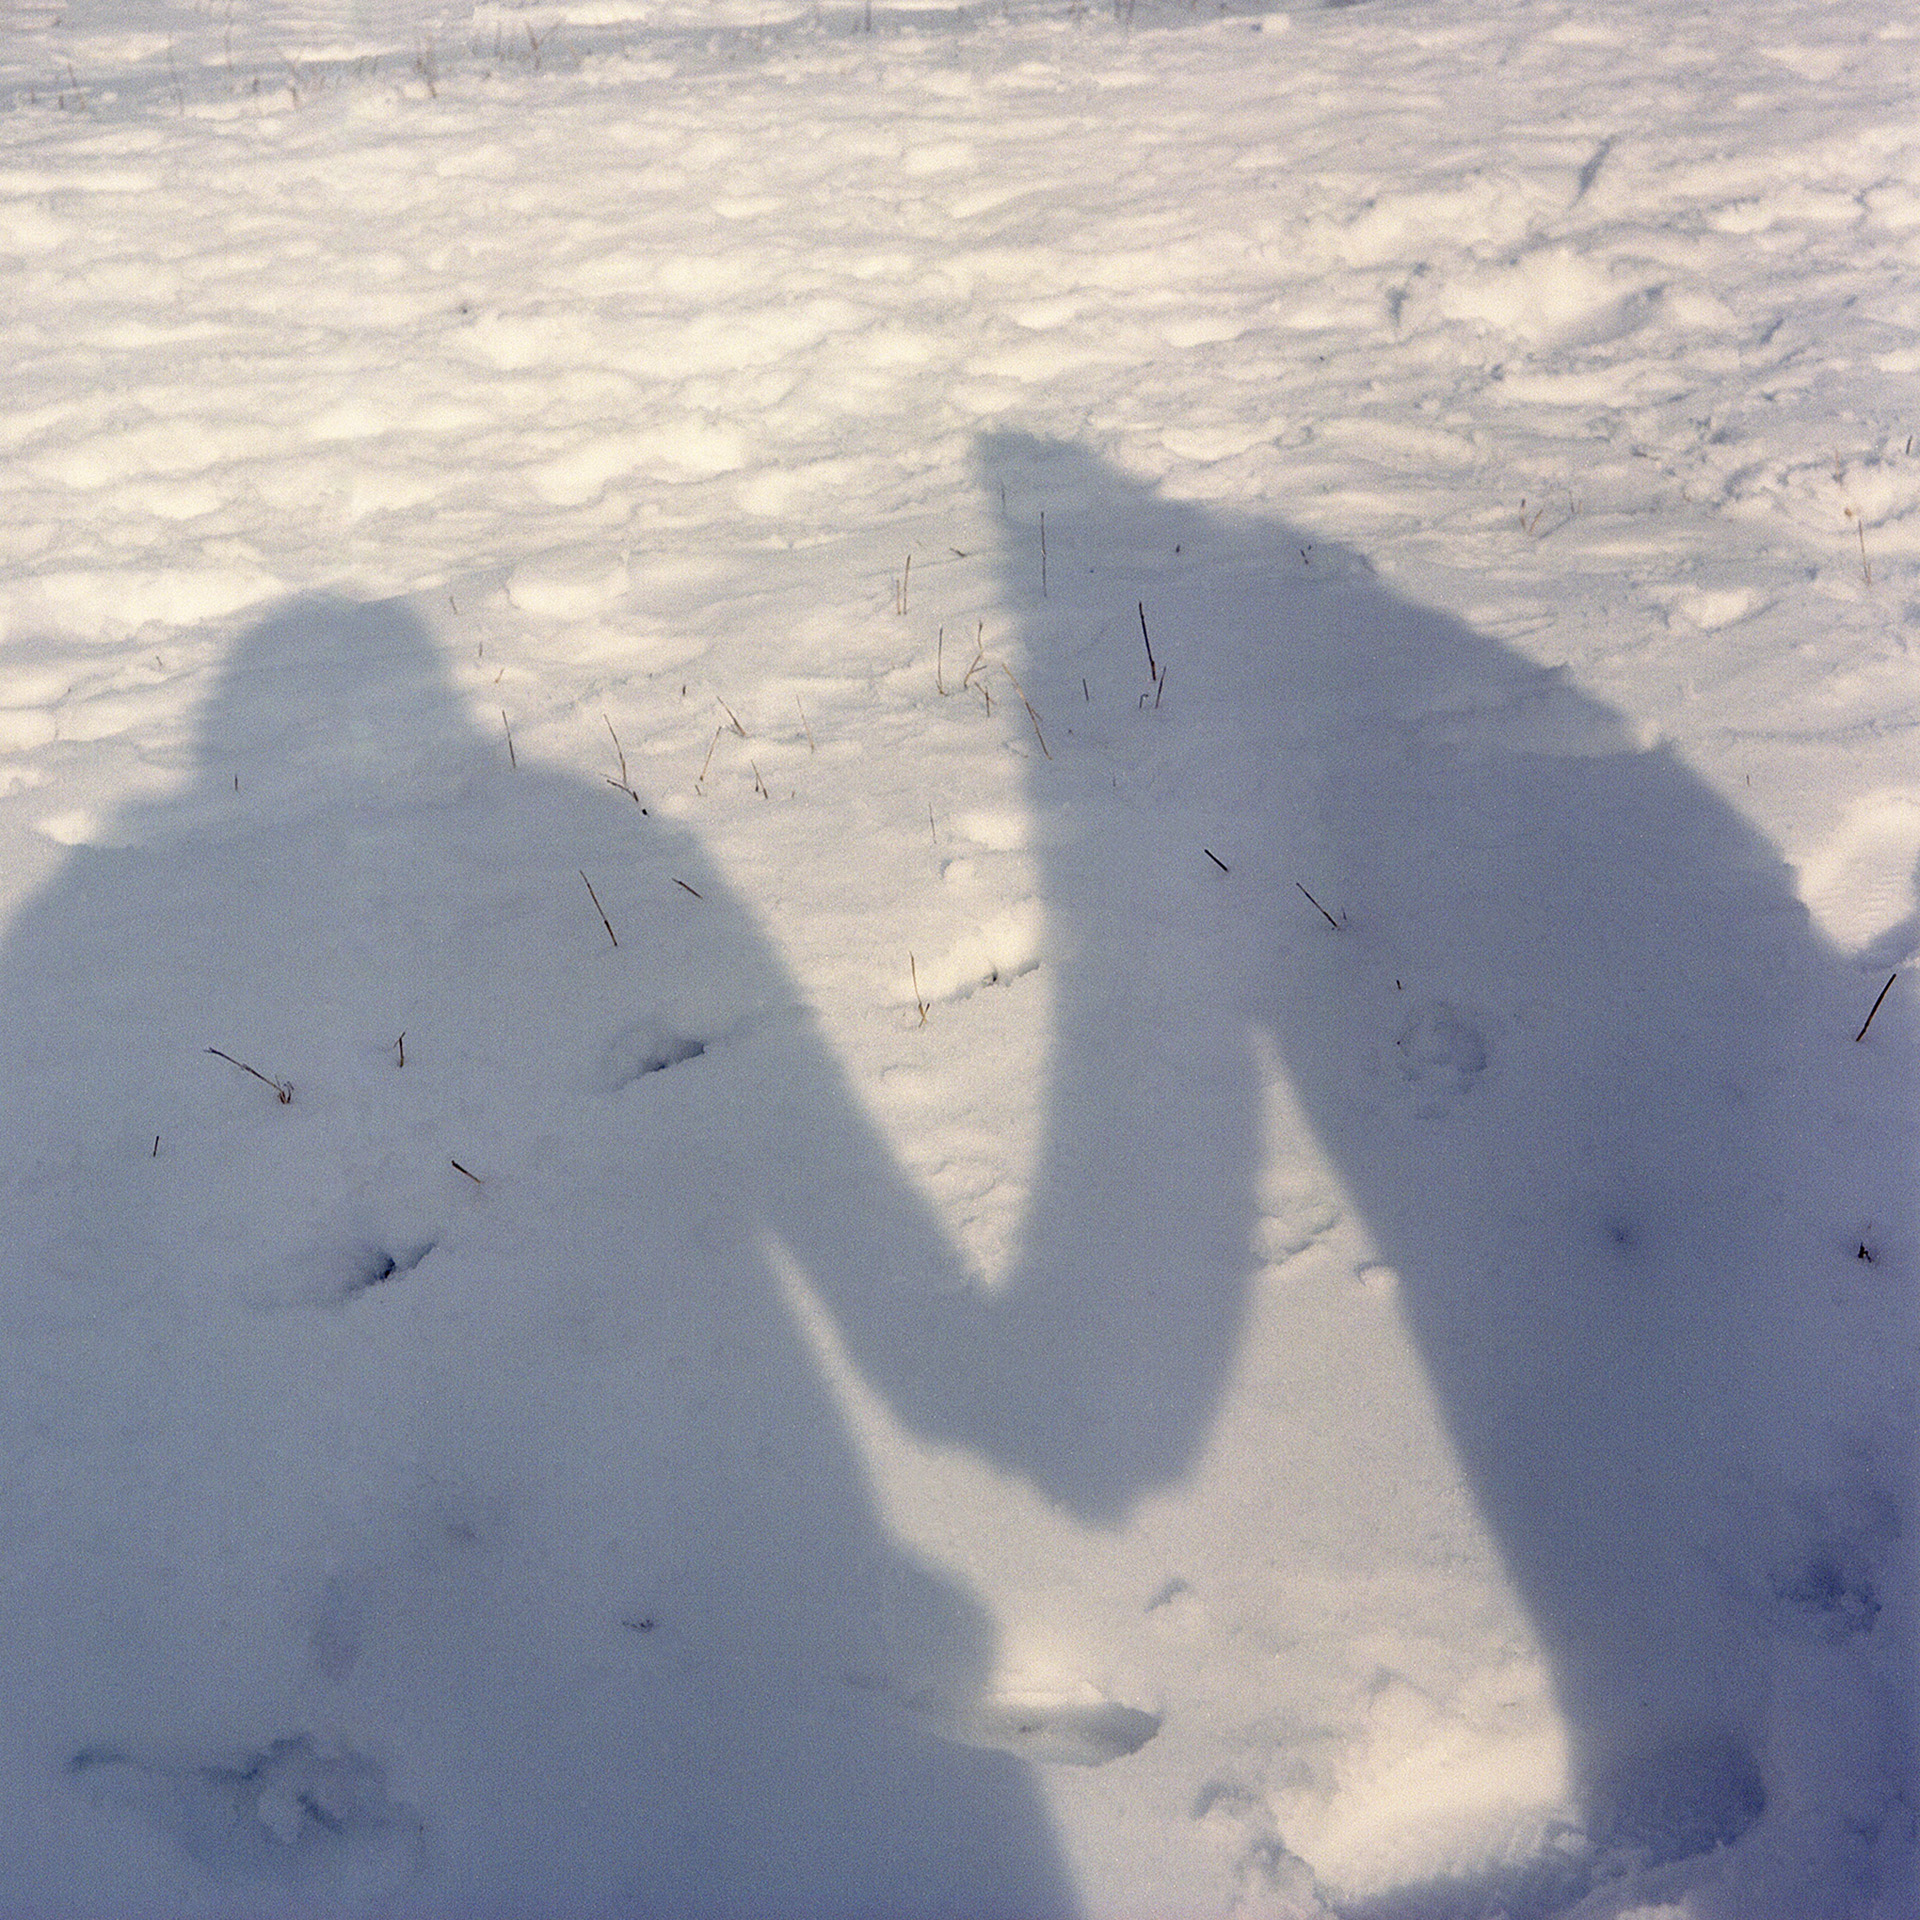 Mariah and Eden’s shadow against the snow covered ground. The shadows are holding hands.